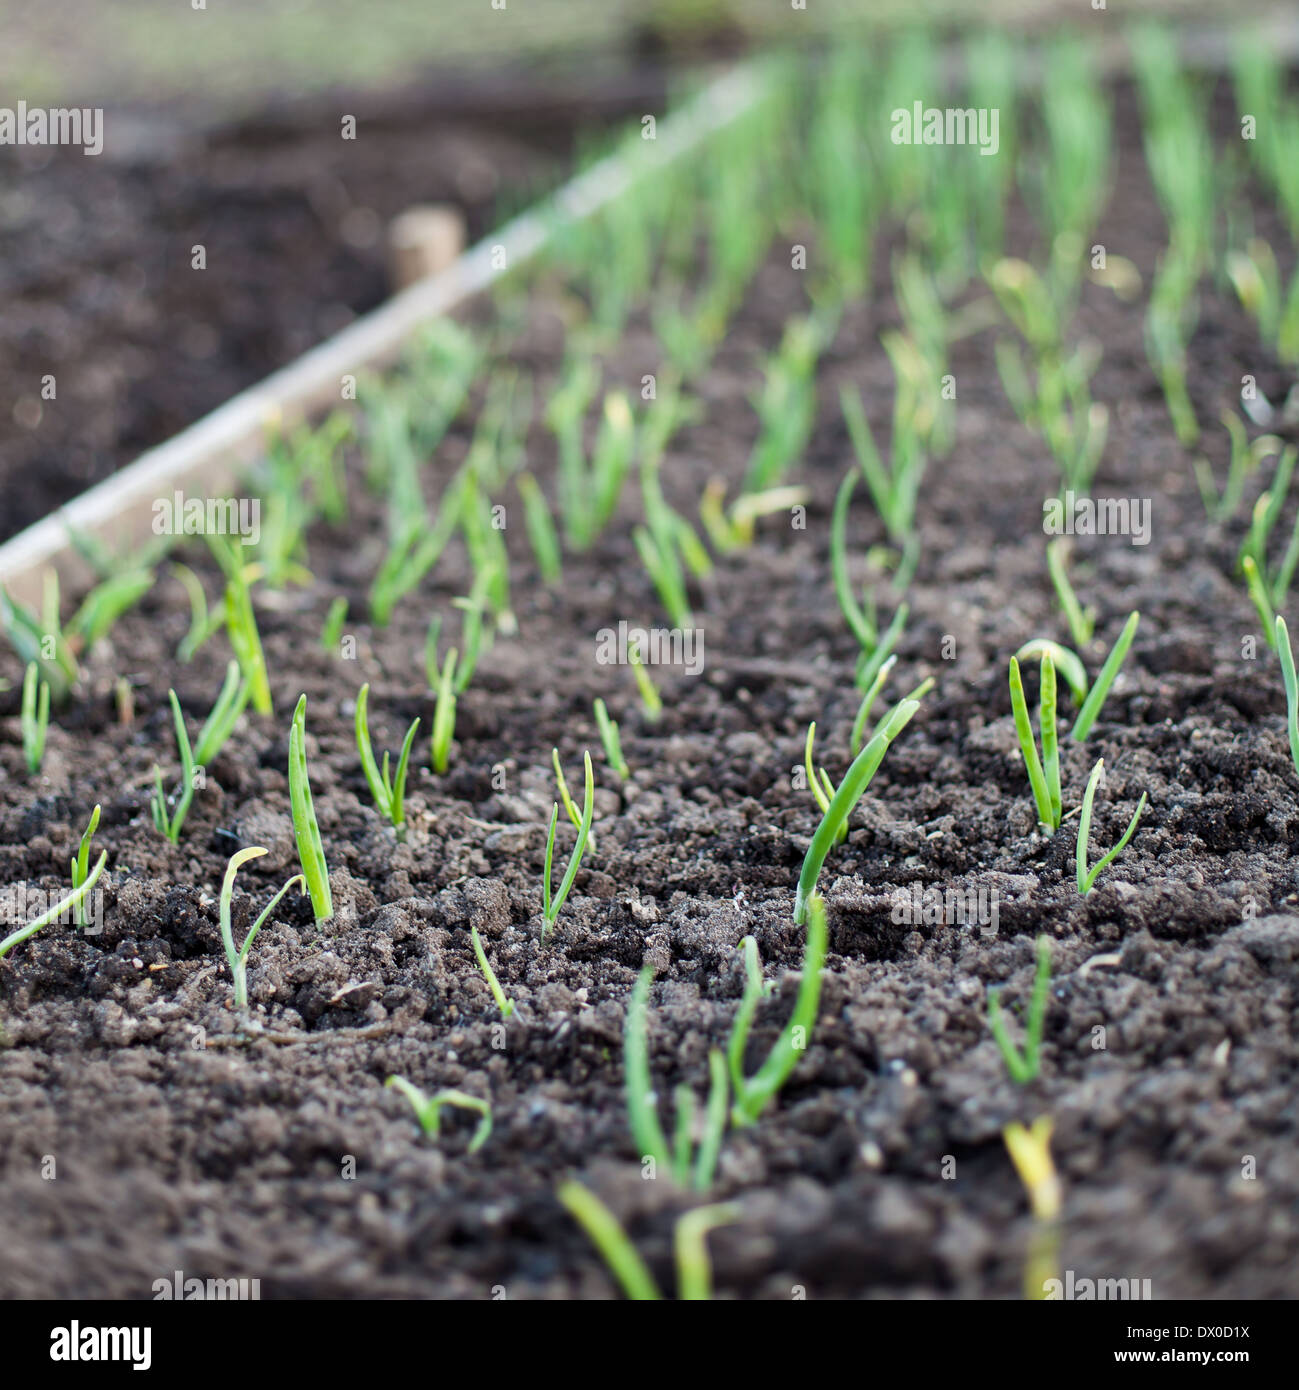 Garden beds with seedlings and leafy greens  Stock Photo